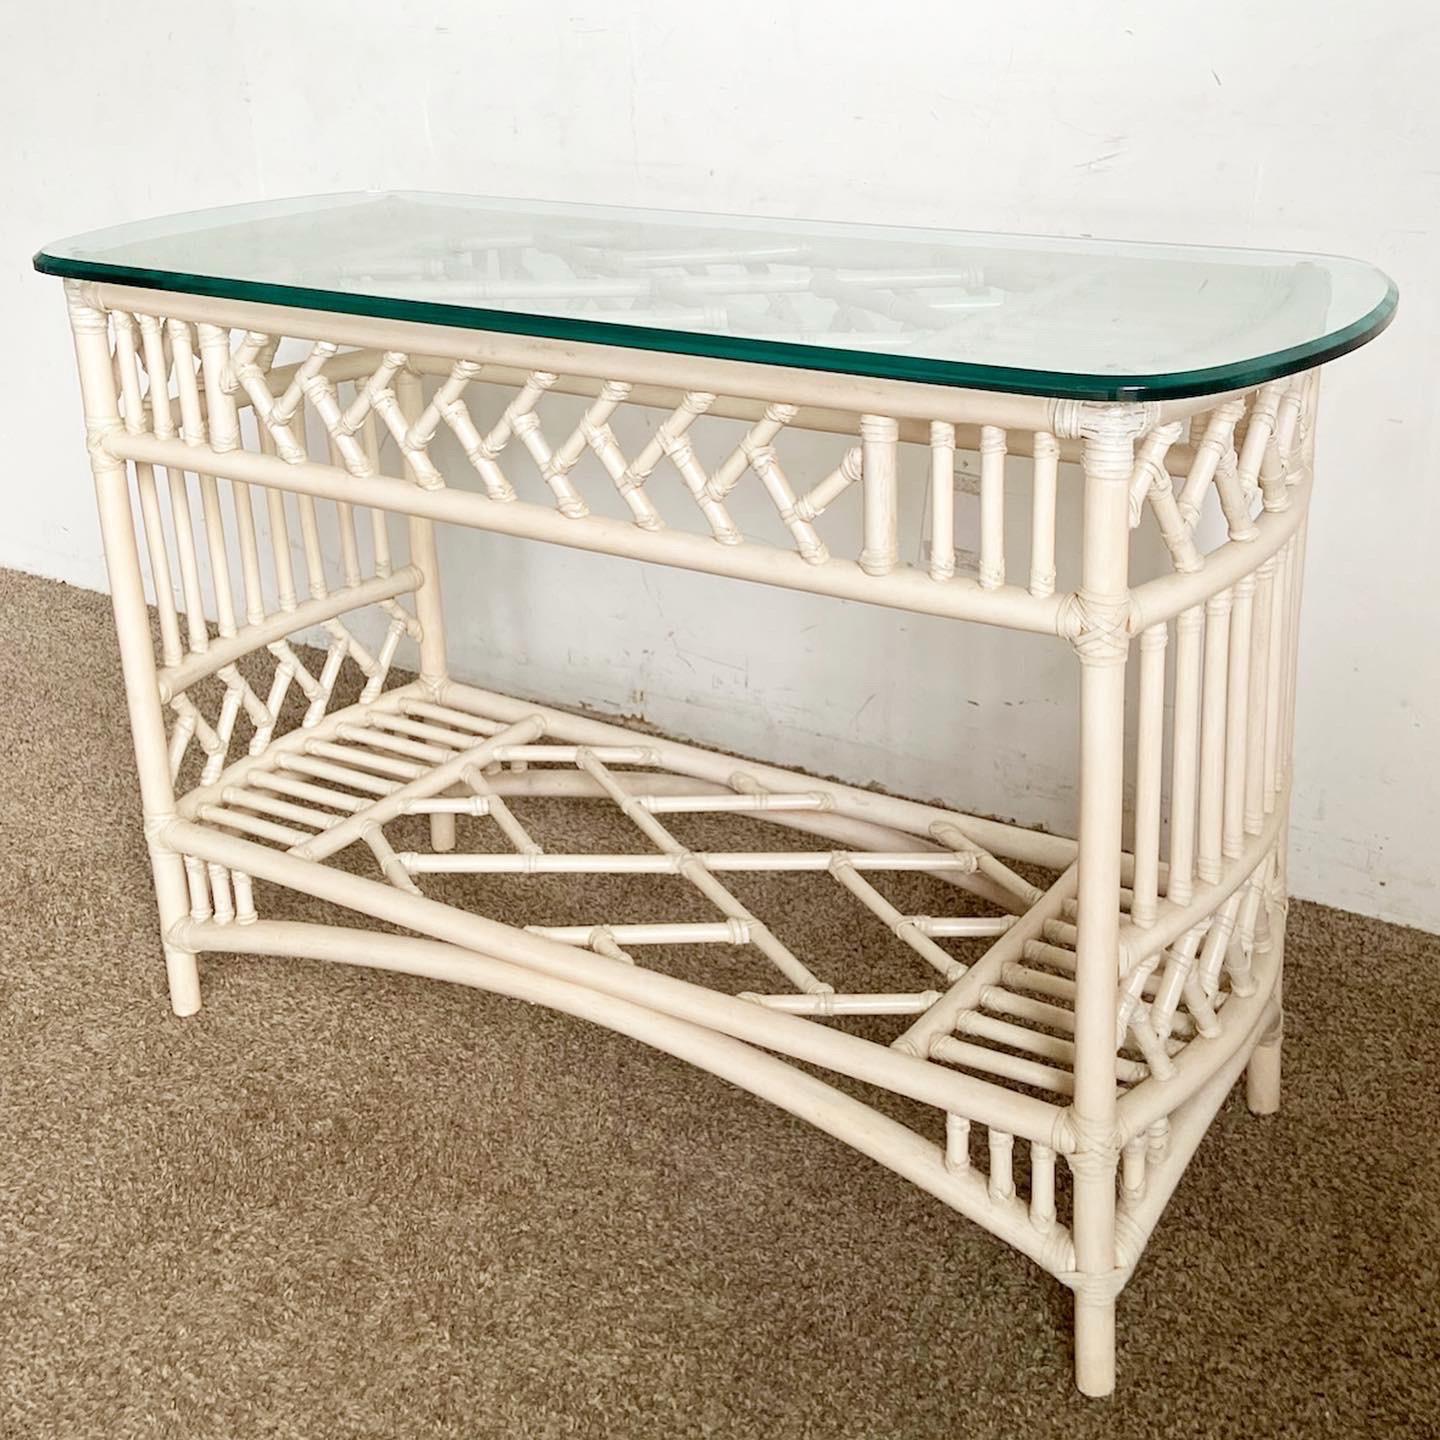 Elevate your decor with the Ficks Reed Boho Console Table. This Boho Chic table features a bamboo and rattan base topped with sleek glass, blending traditional materials with modern design.
Vintage pieces may have age-related wear. Review photos